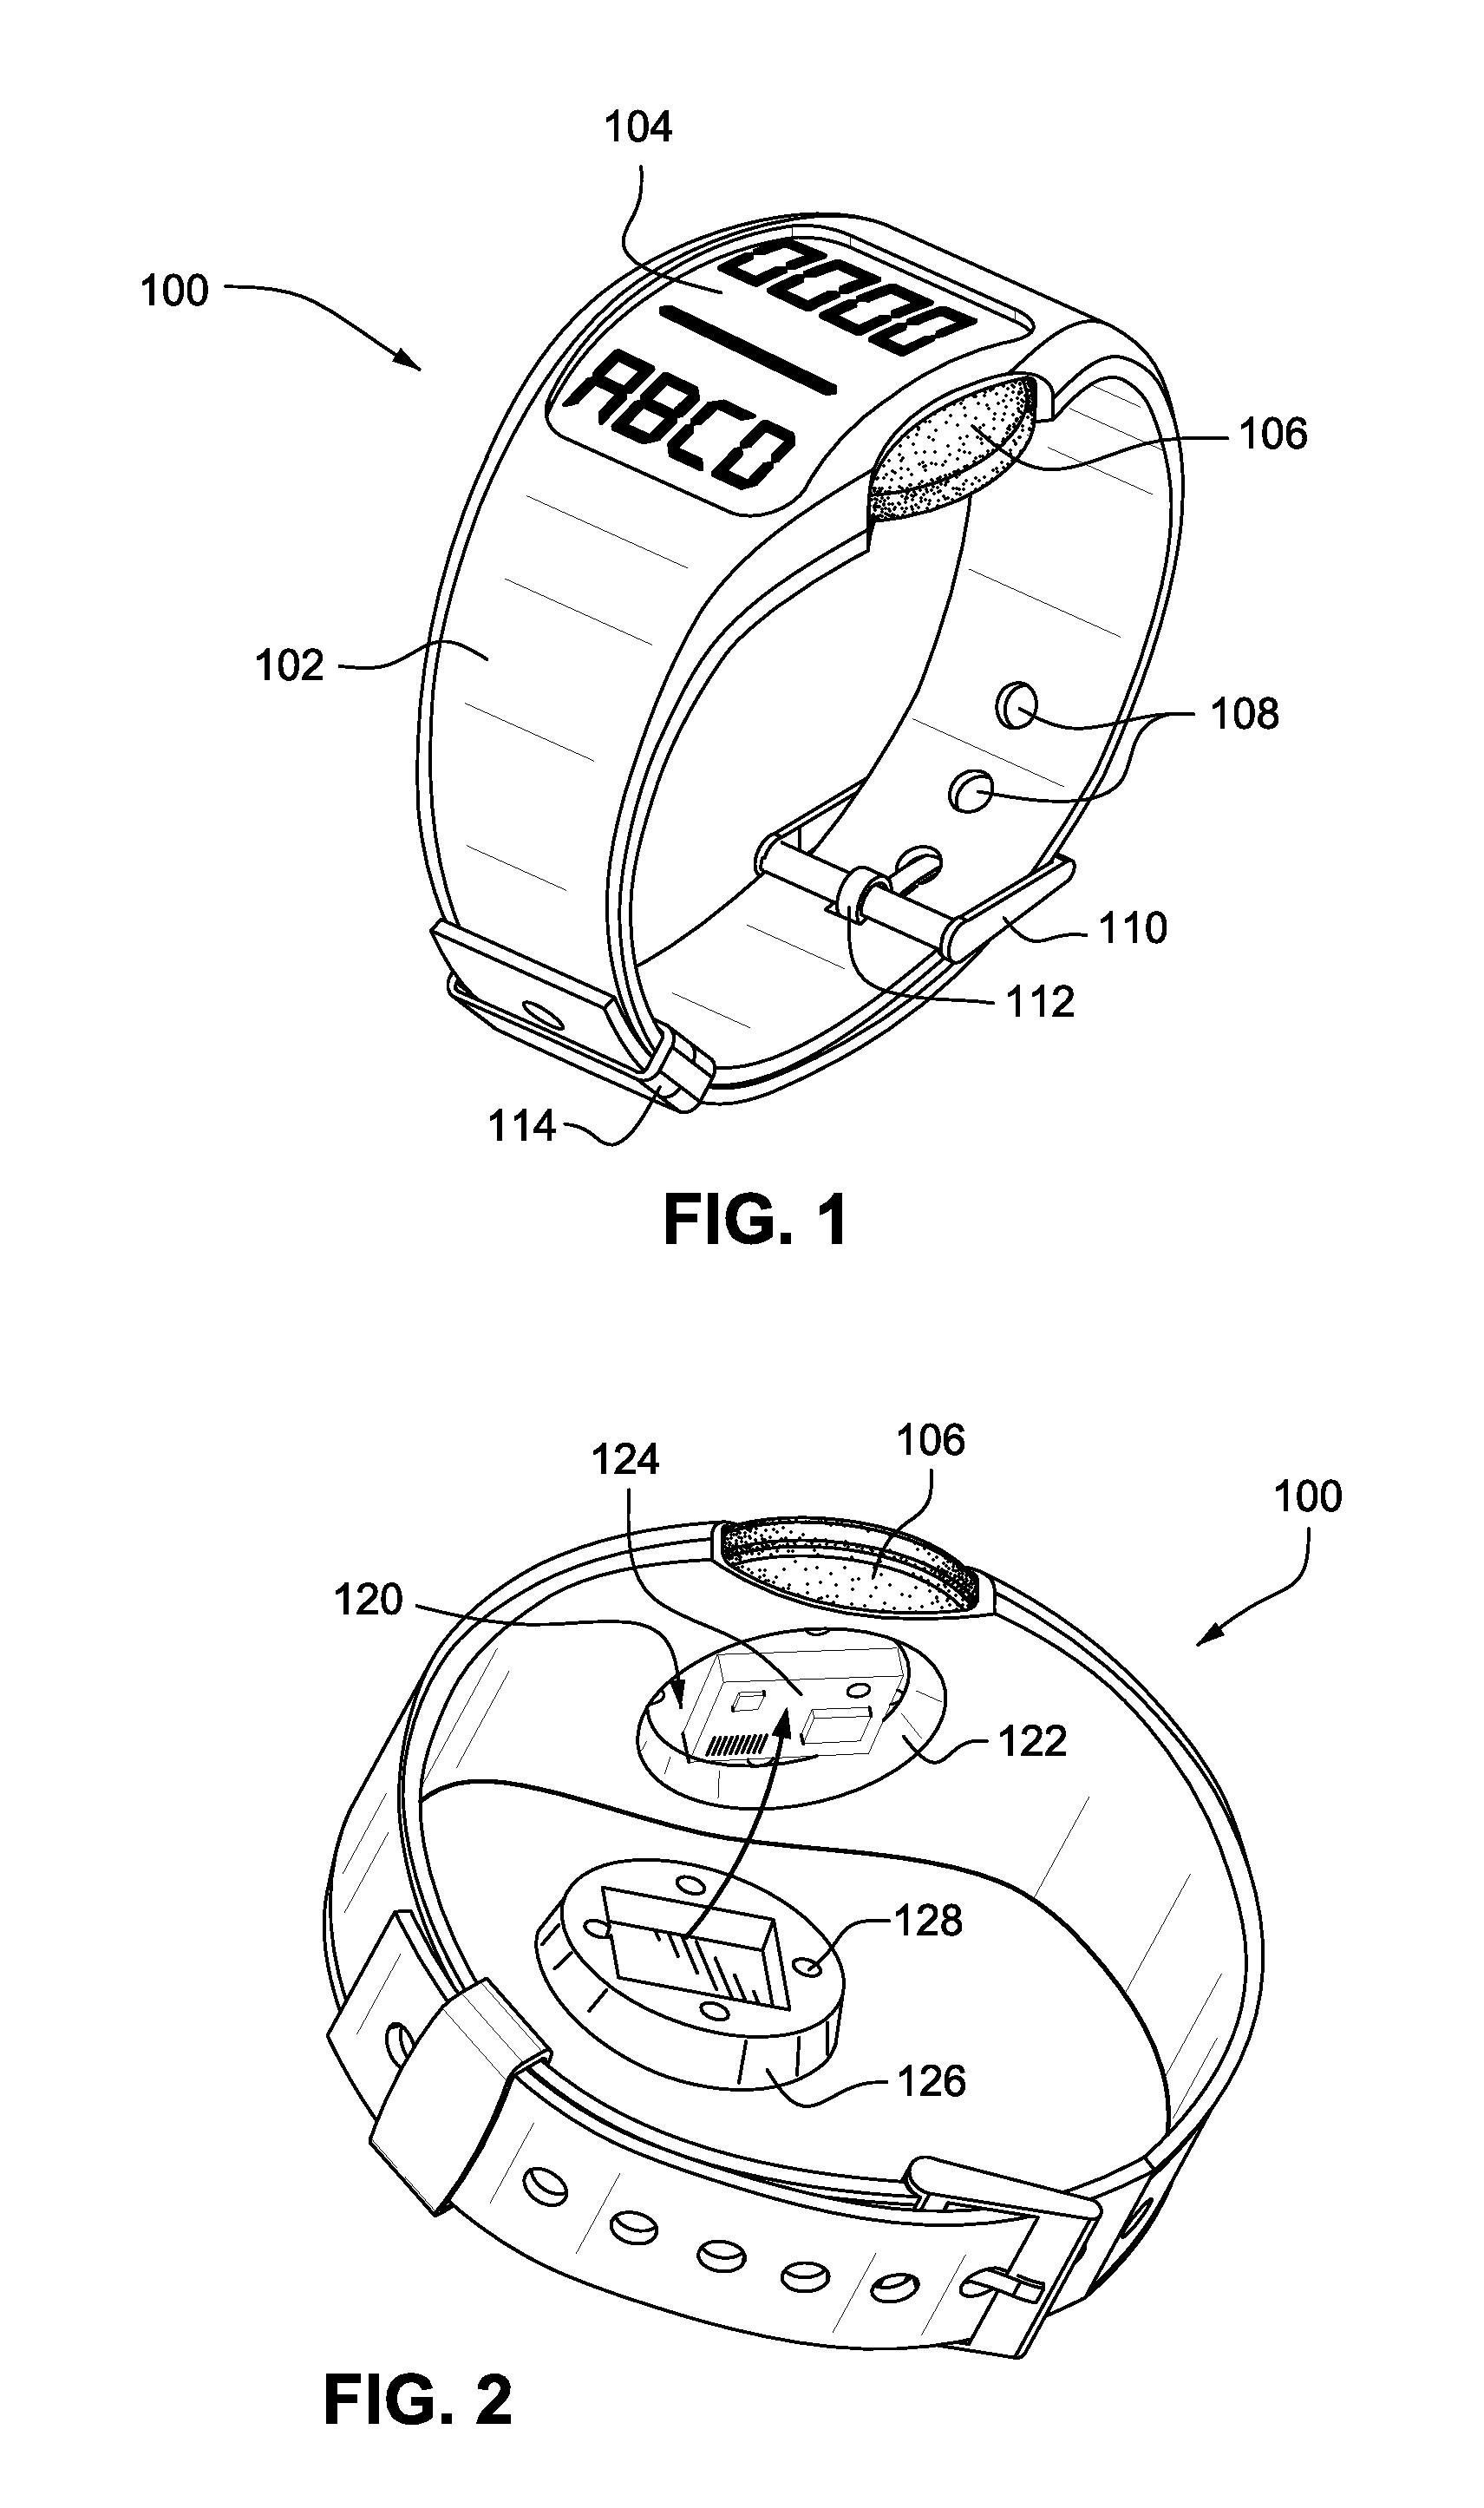 Tamper-alert resistant bands for human limbs and associated monitoring systems and methods